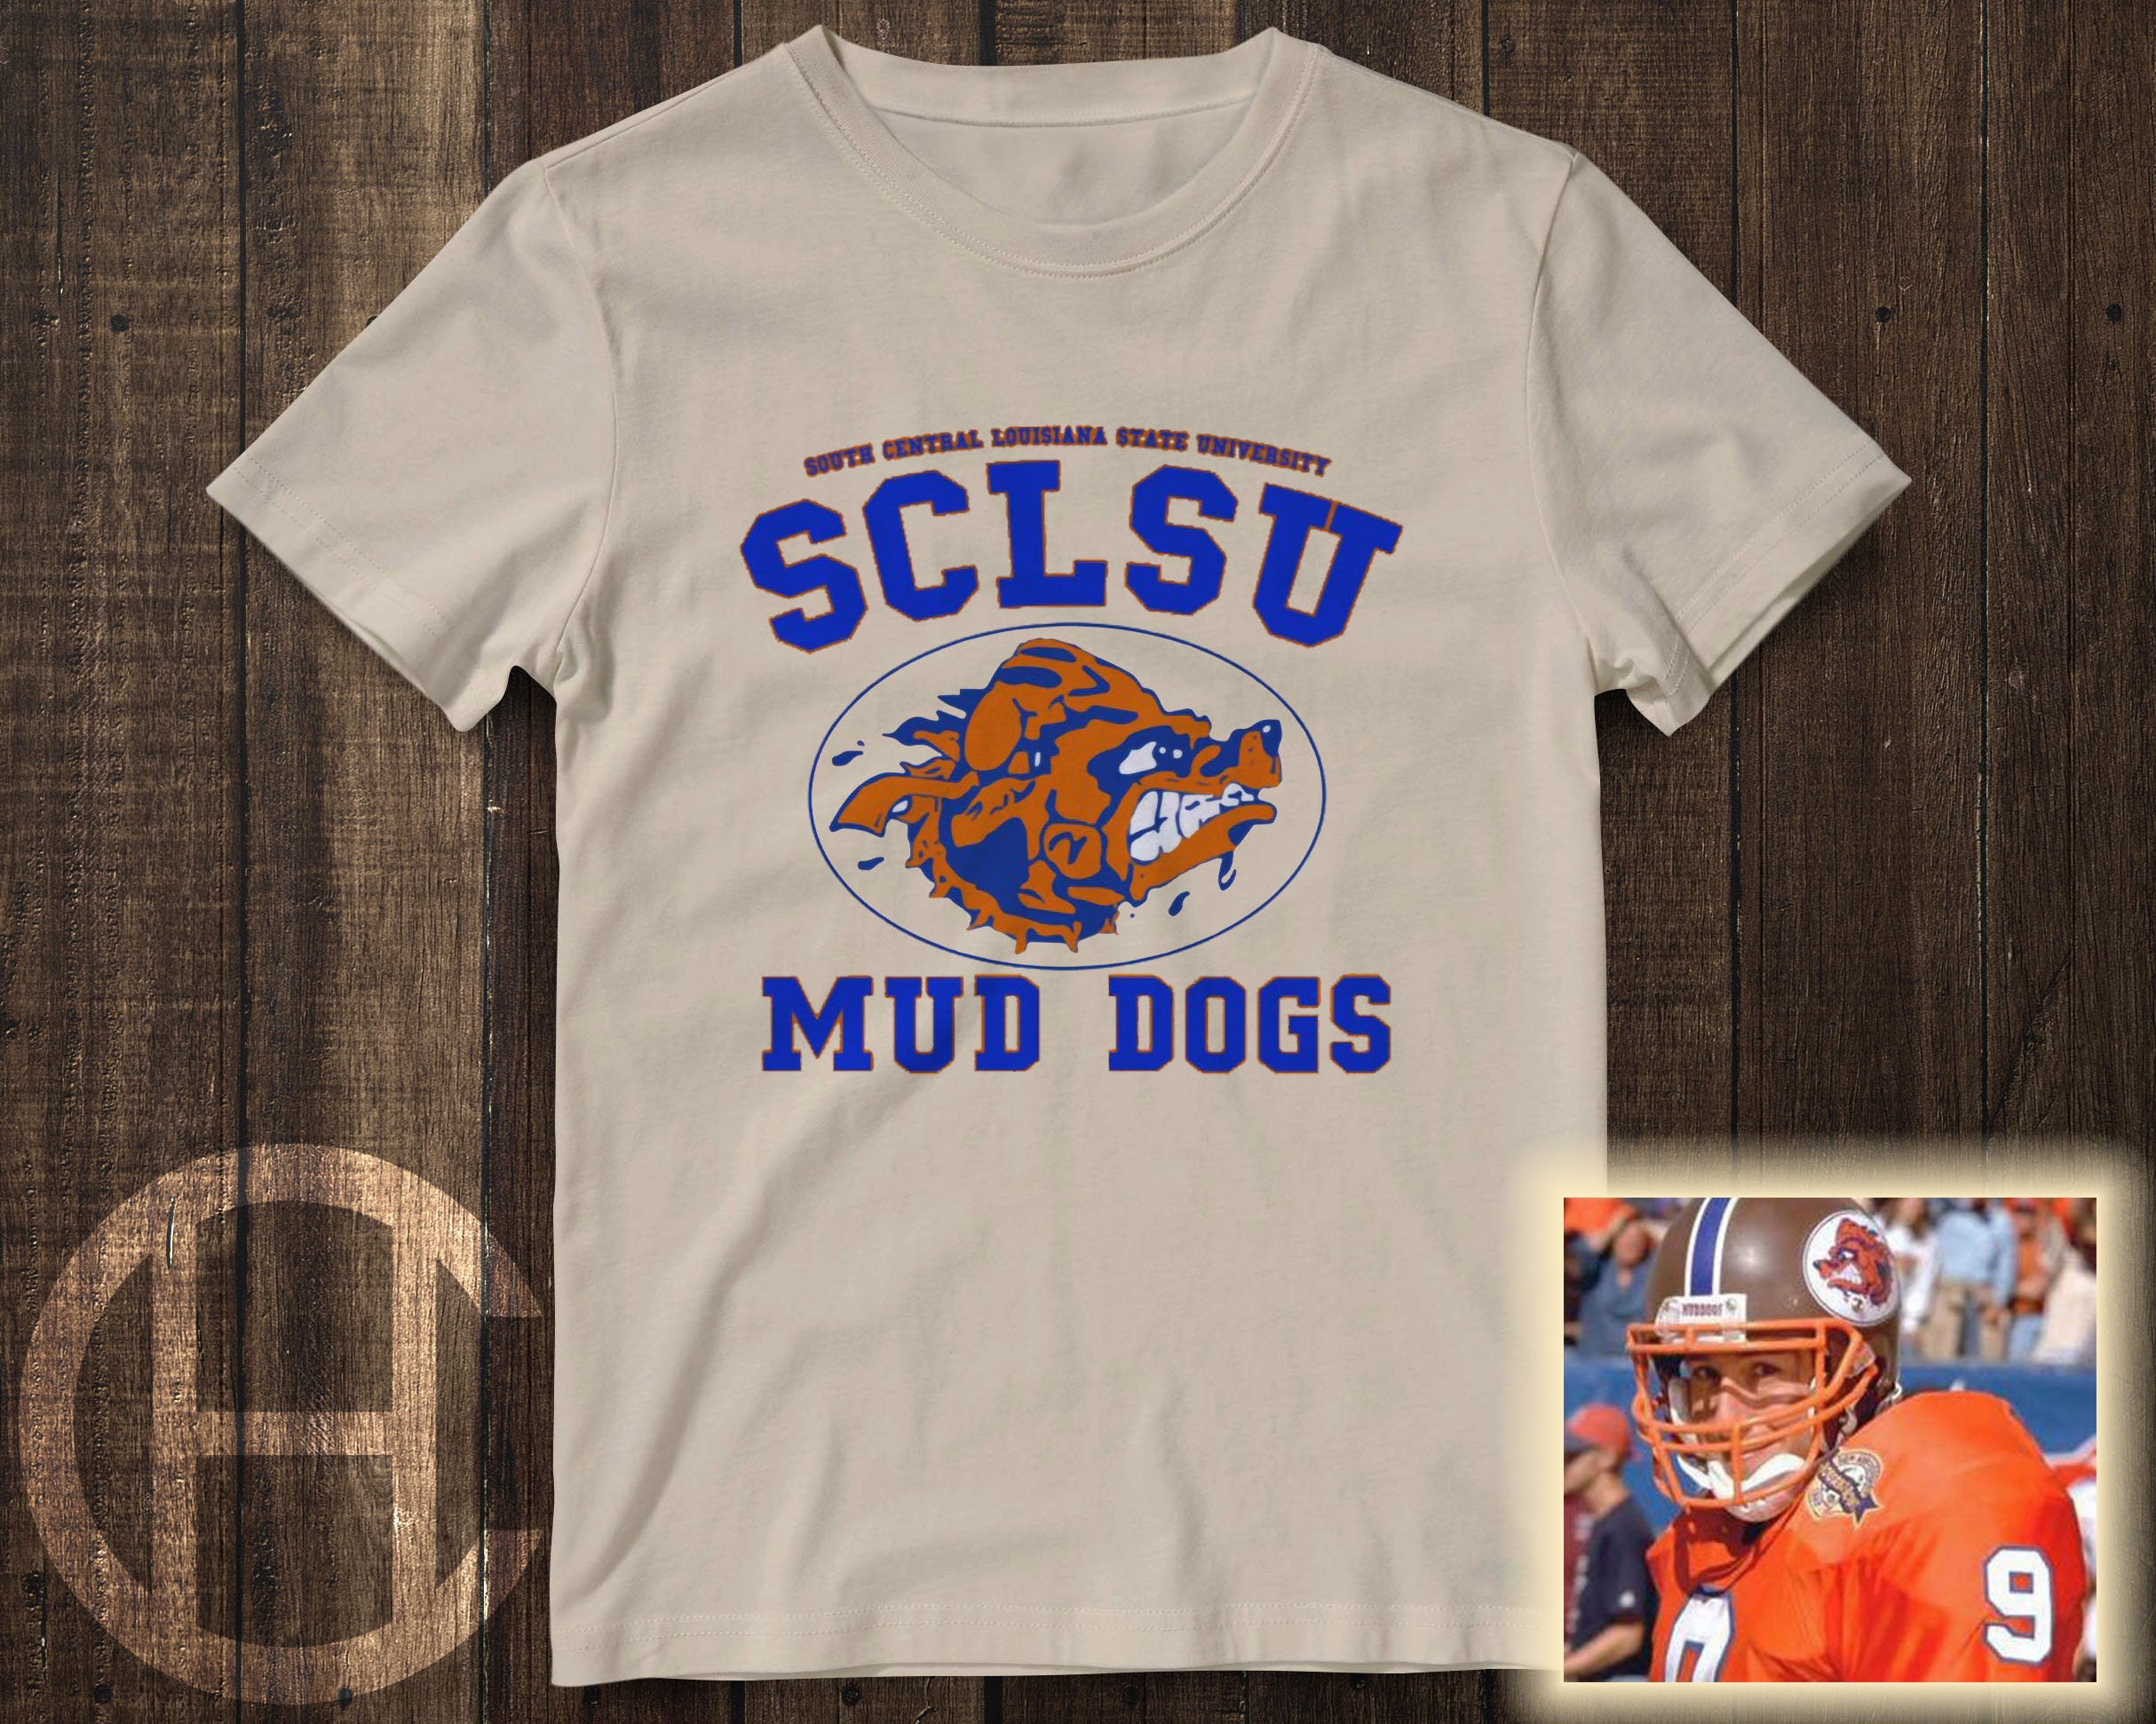 Discover The Waterboy | SCLSU Mud Dogs | T-Shirt